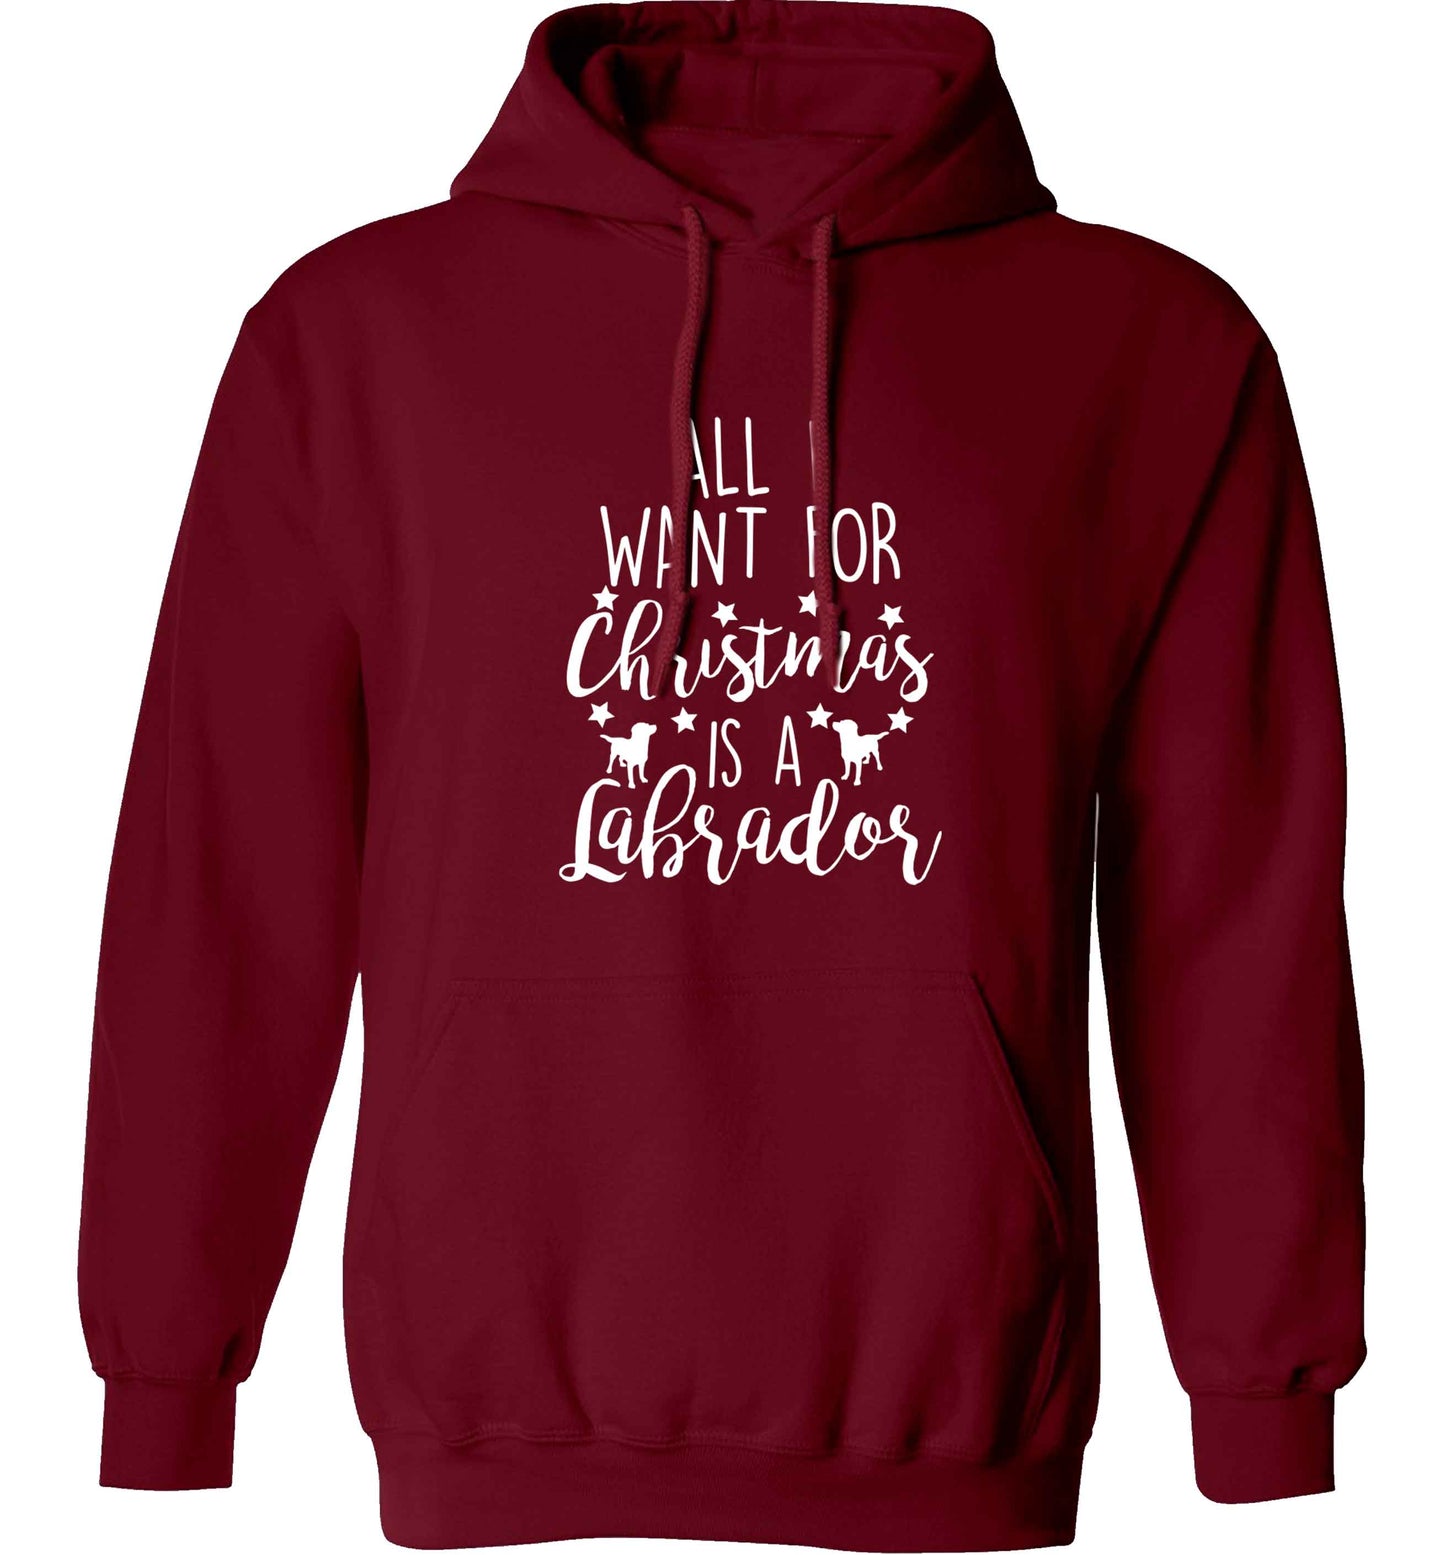 All I want for Christmas is a labrador adults unisex maroon hoodie 2XL